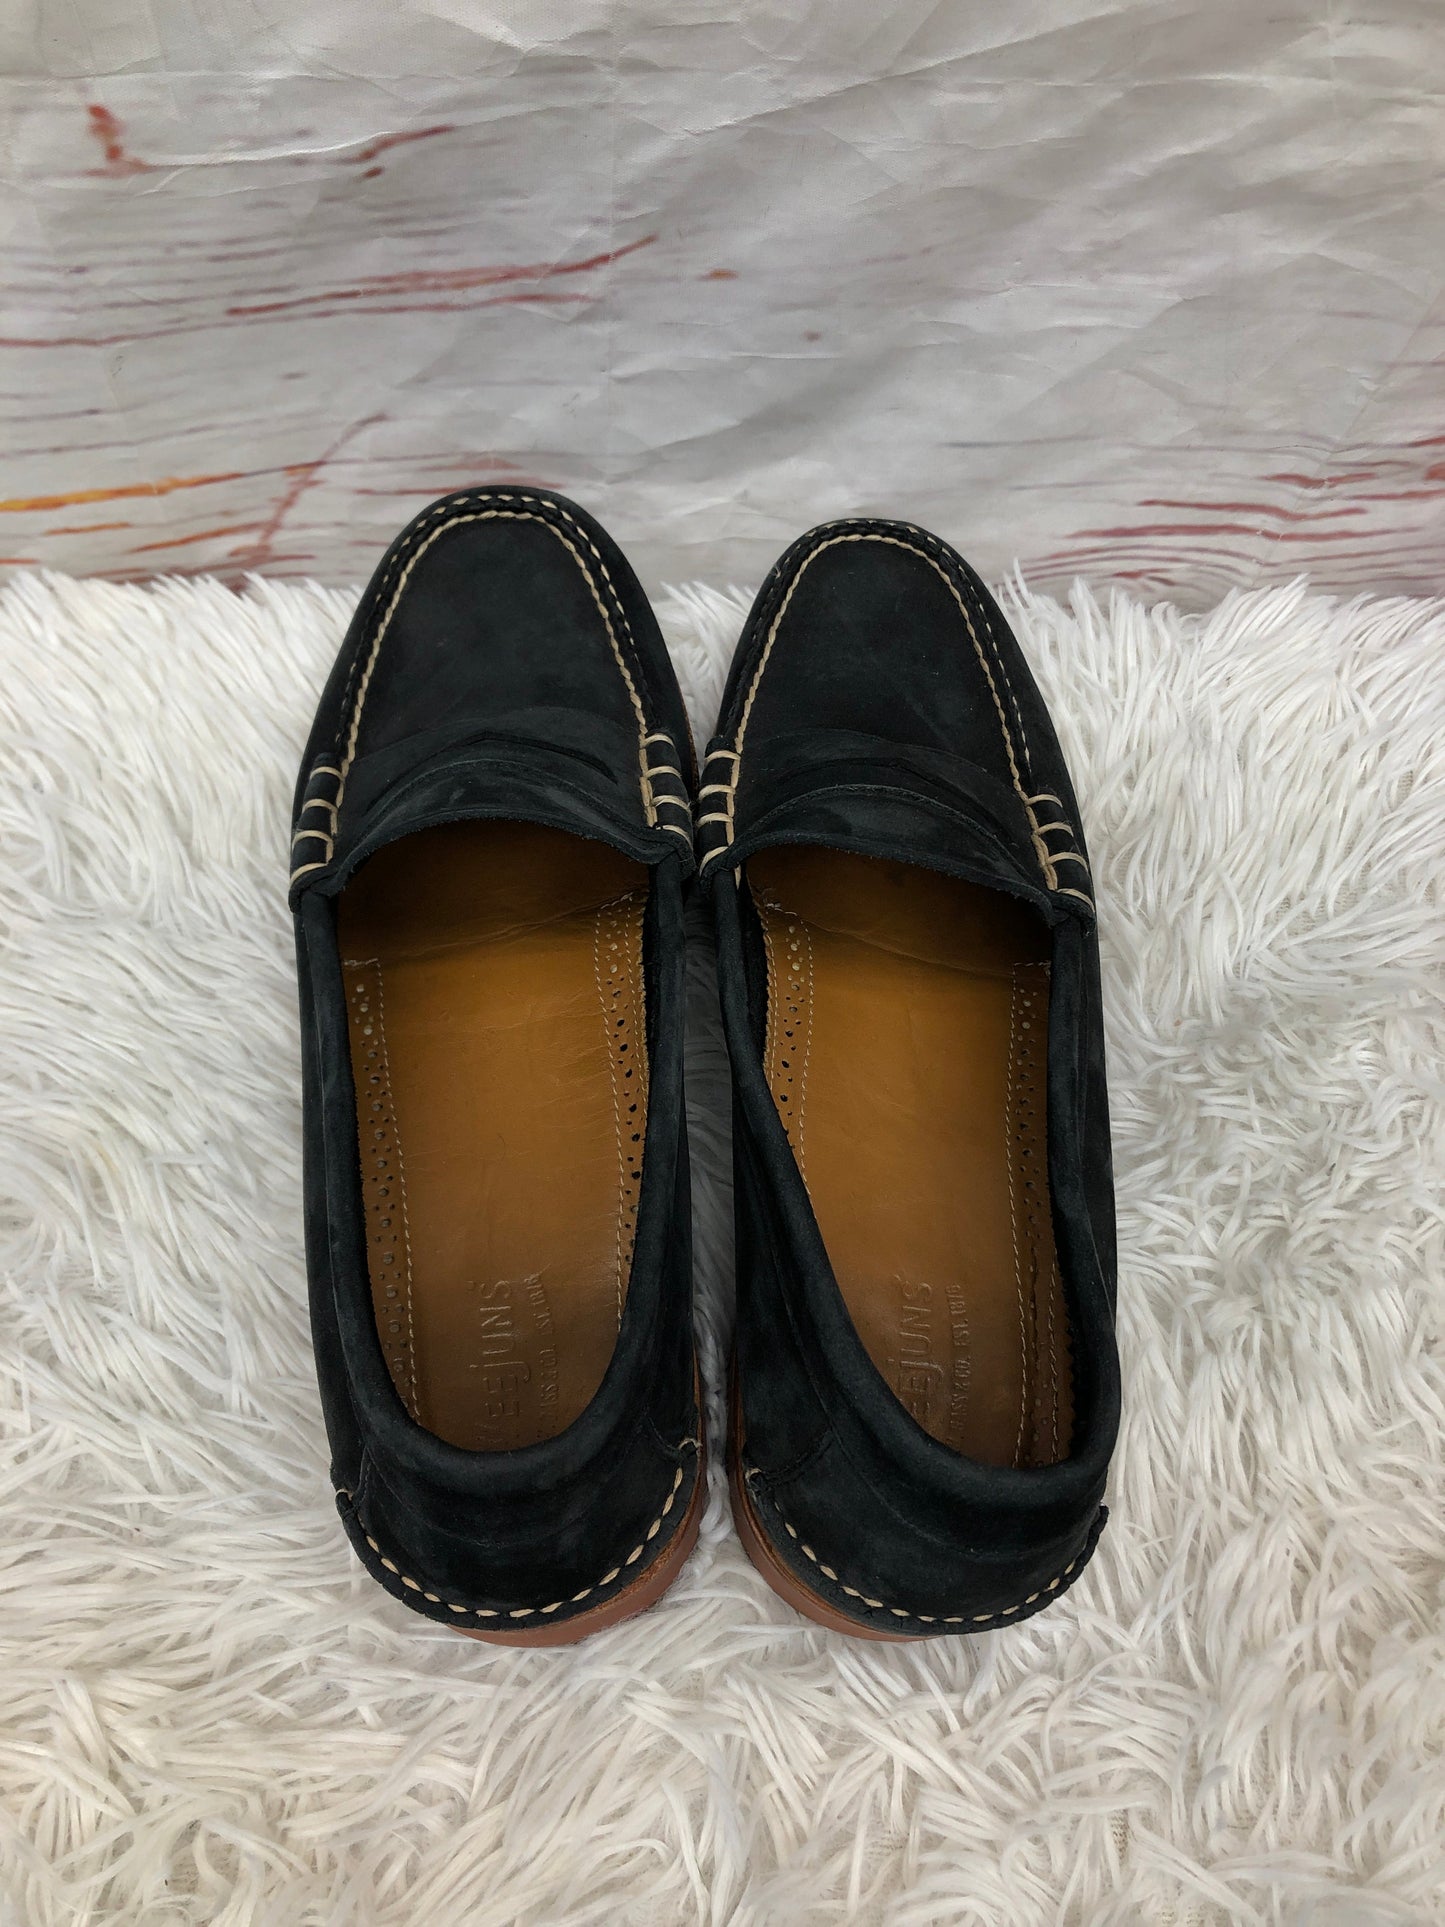 Shoes Flats Loafer Oxford By Clothes Mentor  Size: 8